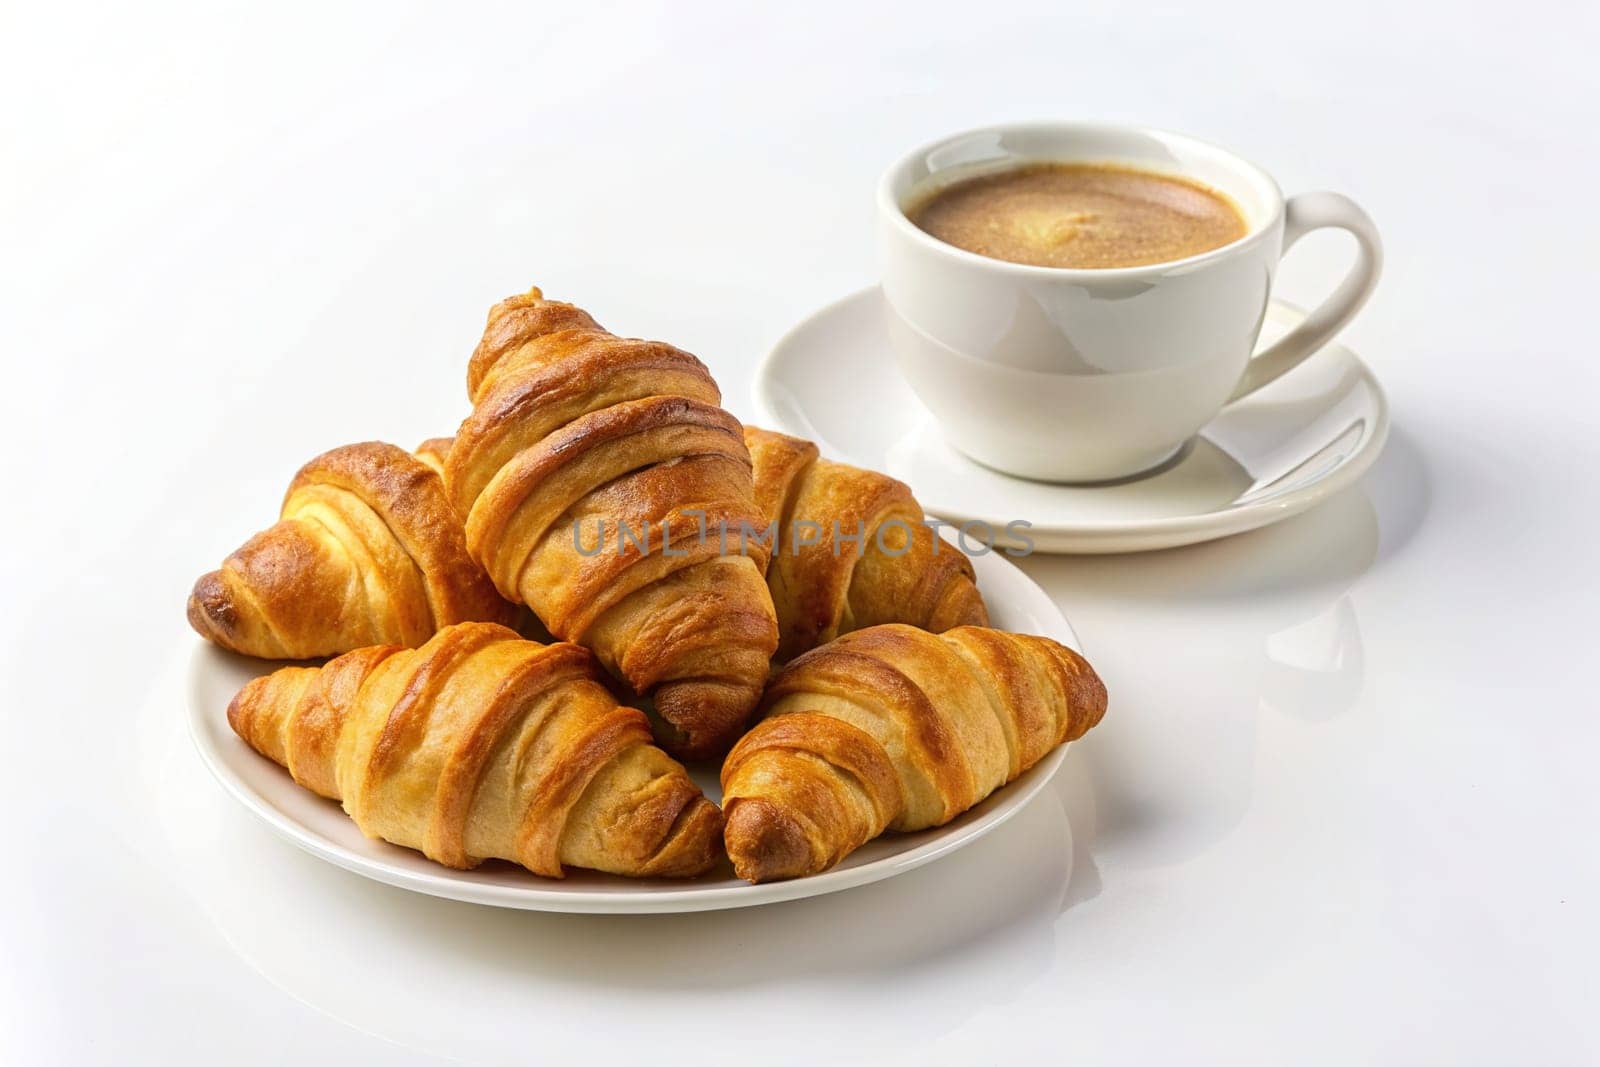 Freshly baked croissants and cup of coffee by yilmazsavaskandag